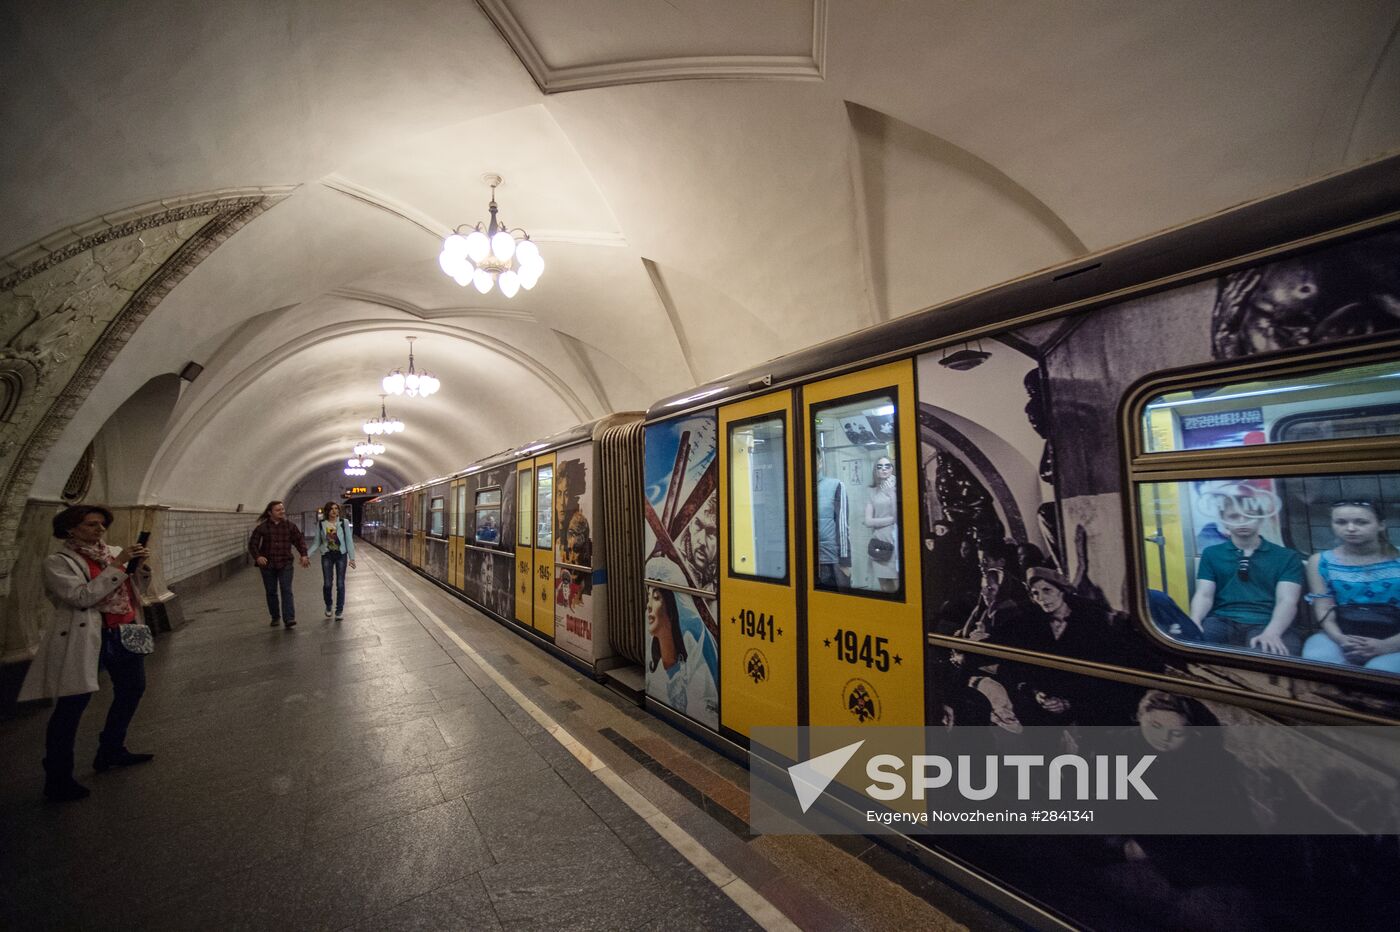 Victory Cinema train launched at Moscow Metro